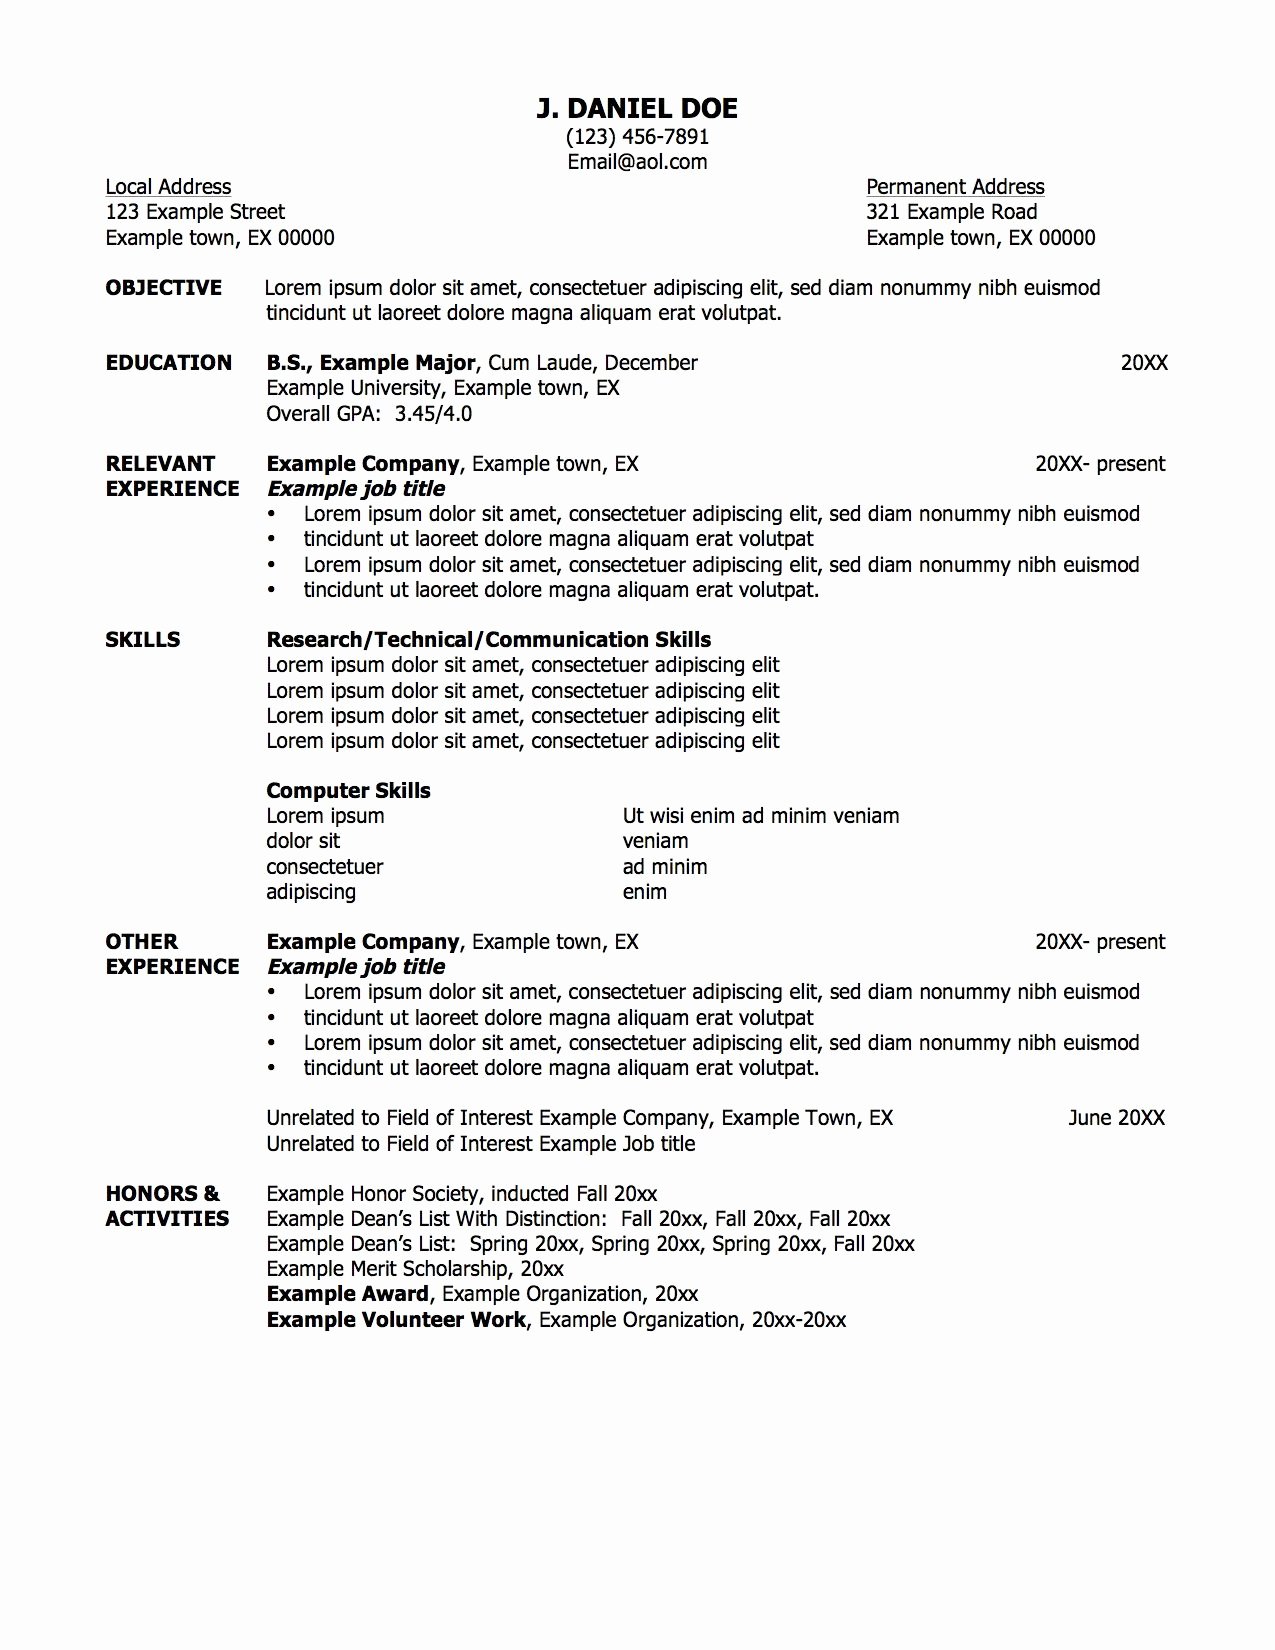 Sample Resume with Professional Title for Job Objective